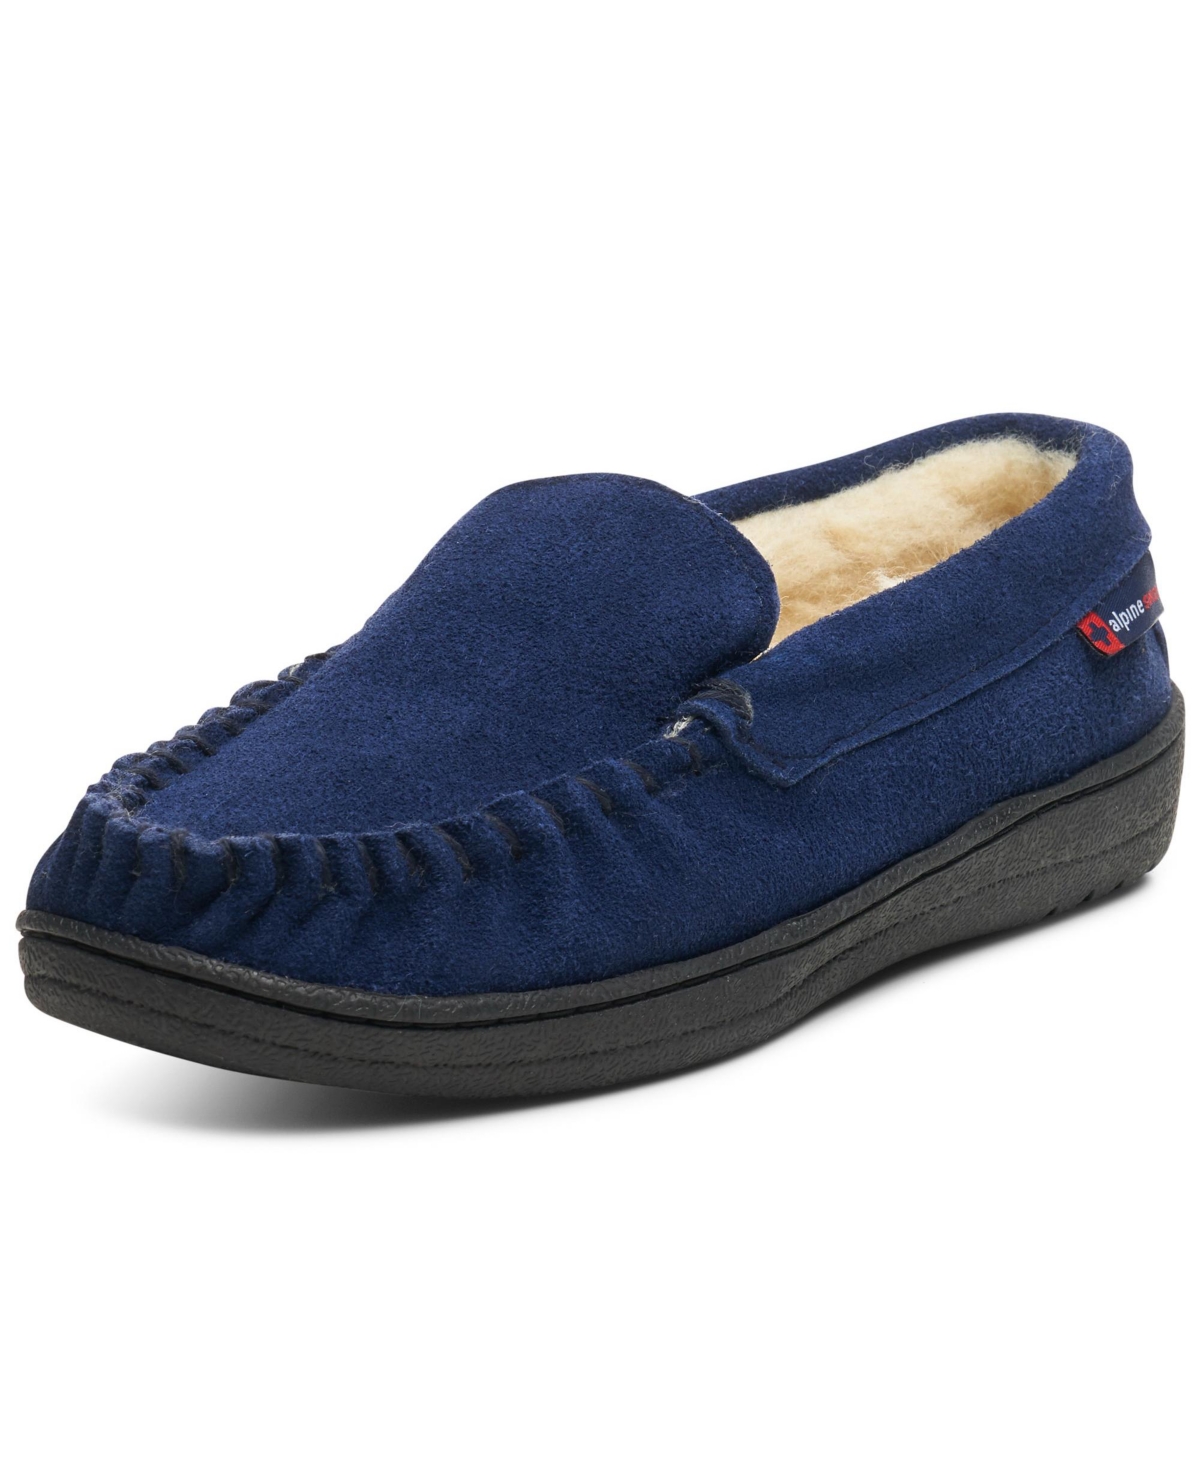 Yukon Men's Suede Shearling Moccasin Slippers Moc Toe Slip On Shoes - Navy